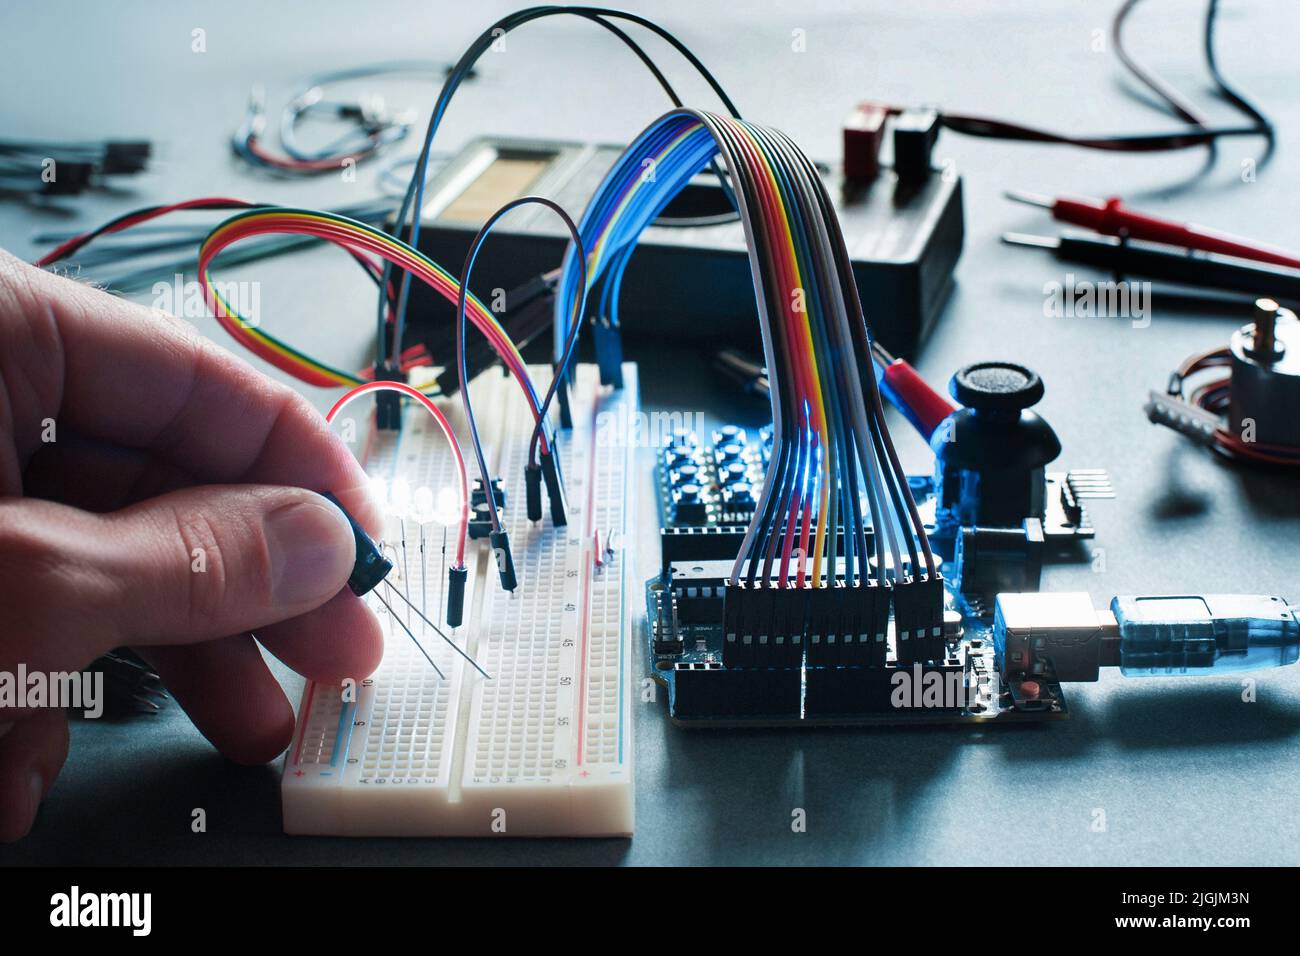 Circuits creation with electronic components Stock Photo